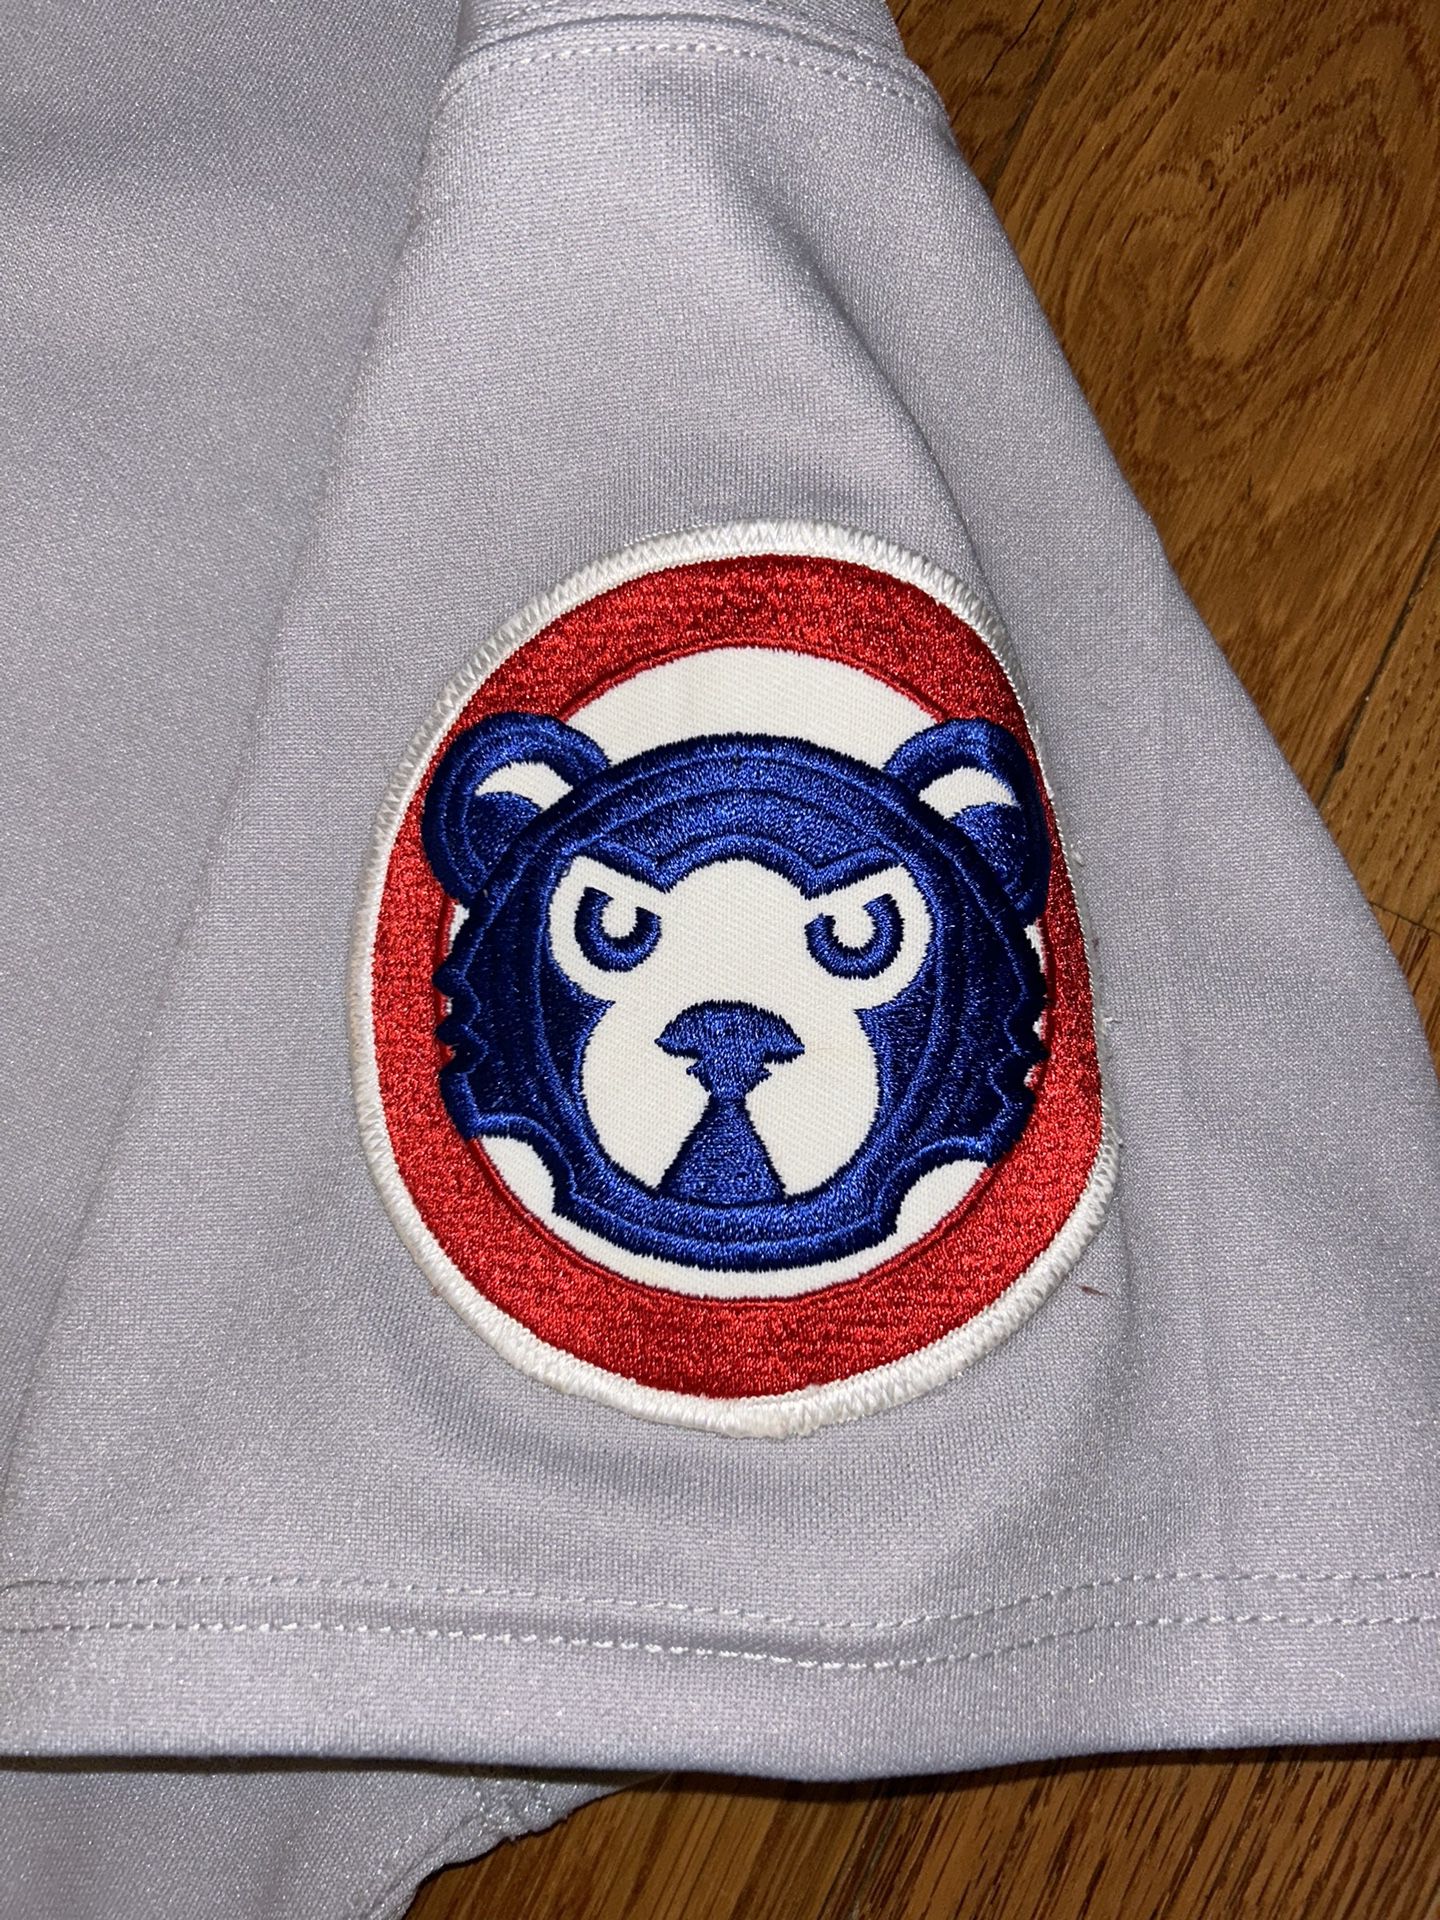 Chicago Cubs Cursive Russell Athletic Diamond Vintage Jersey Sz 48